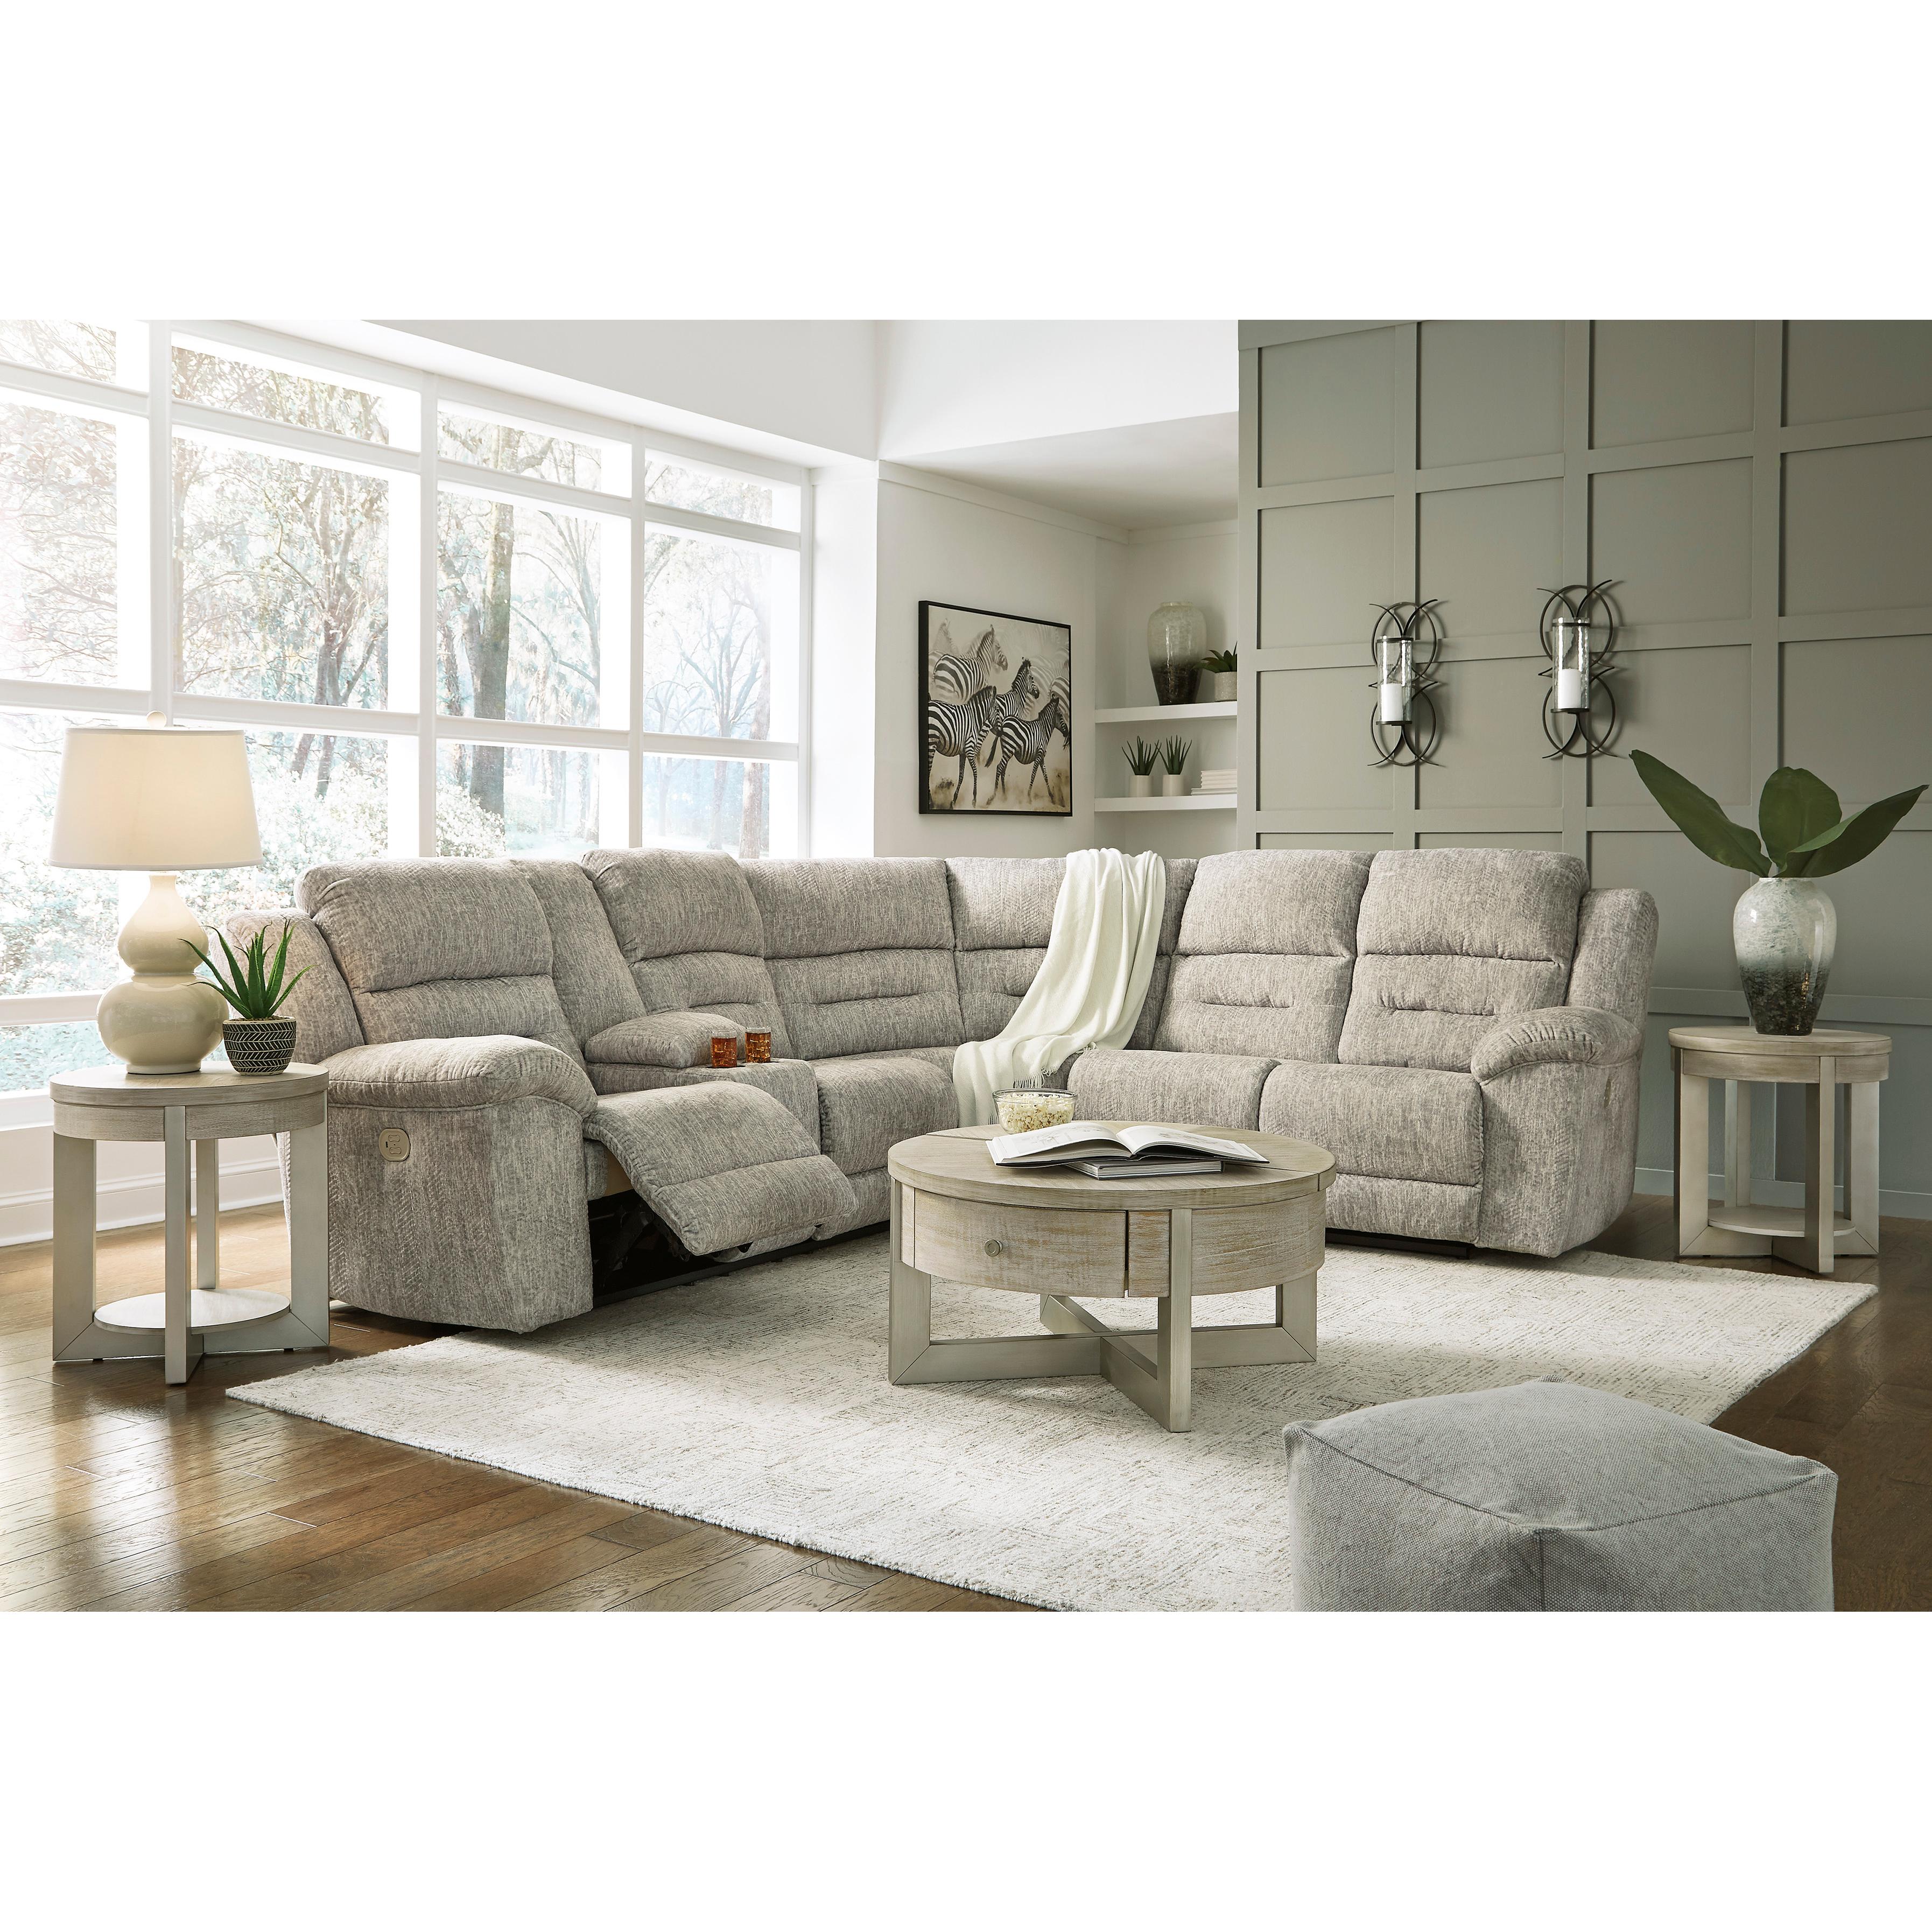 Signature Design by Ashley Family Den Power Reclining Fabric 3 pc Sectional 51802S1